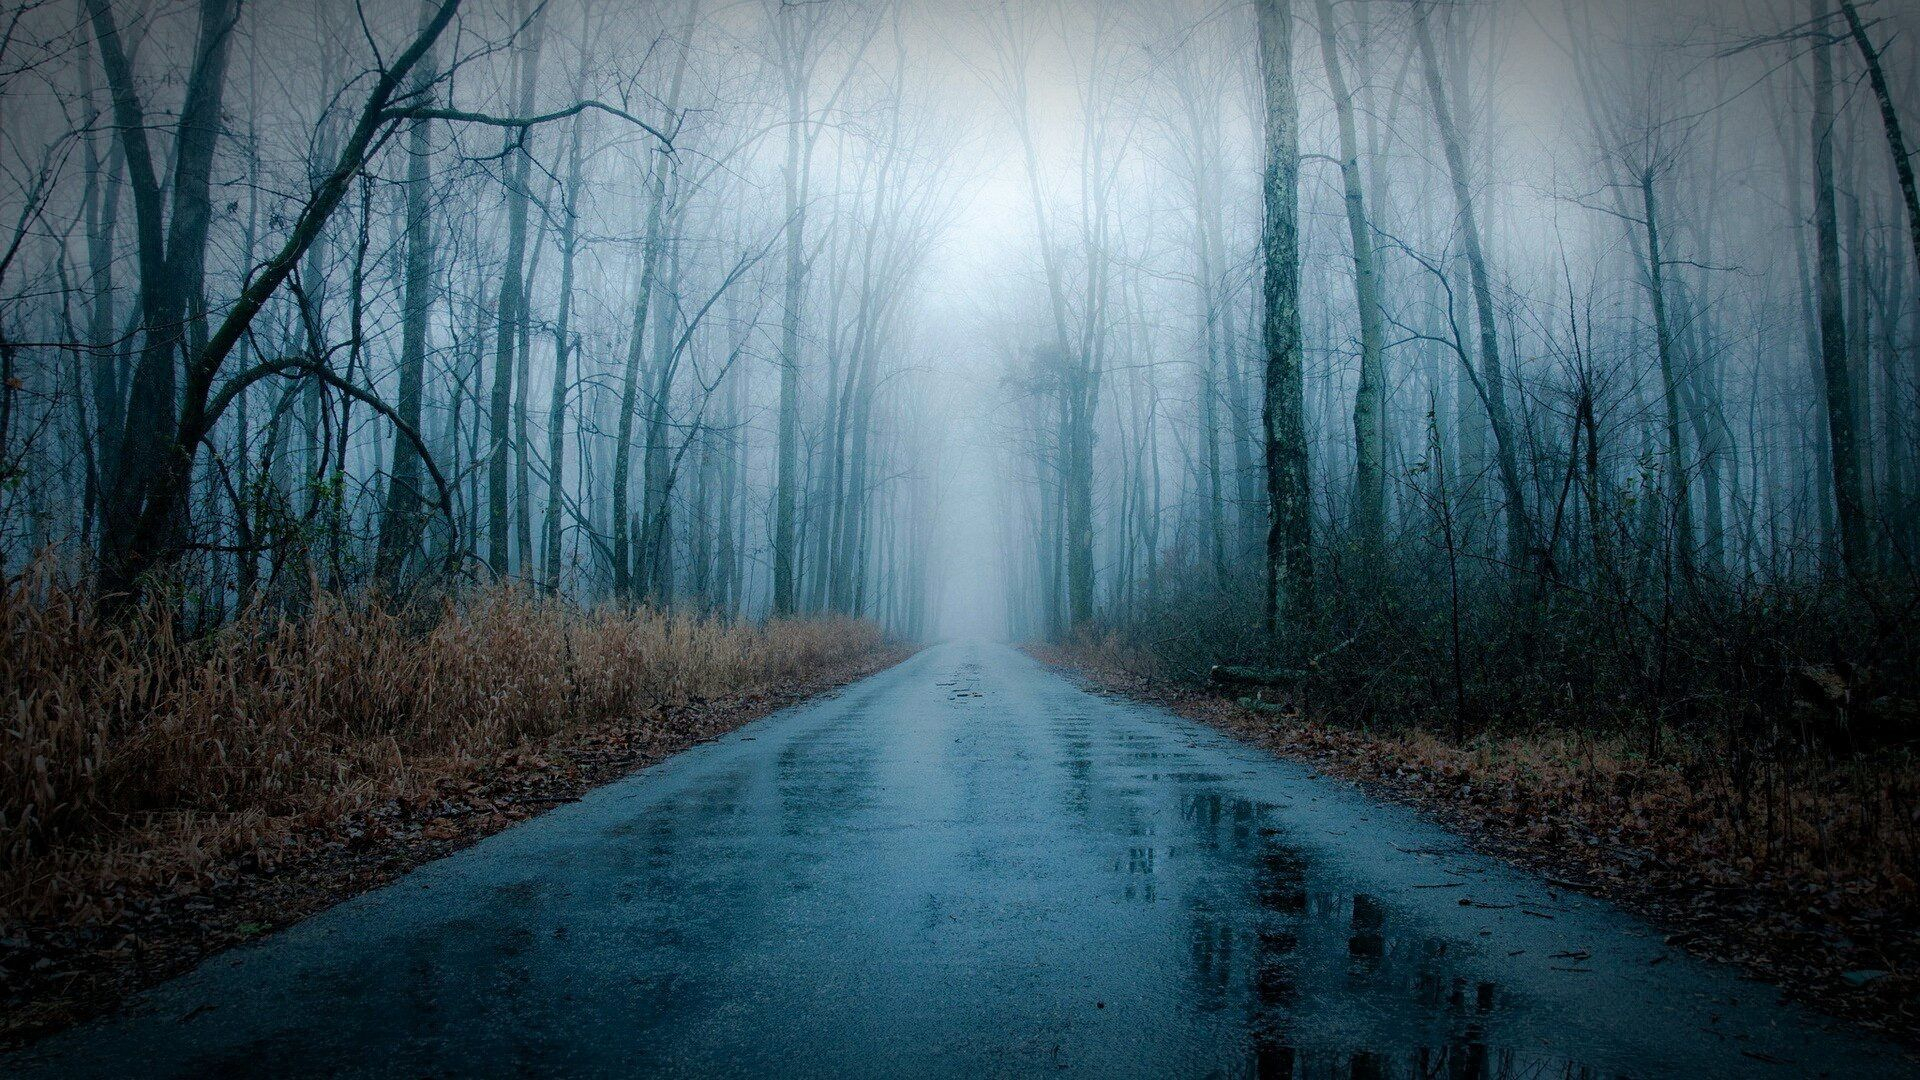 1920x1080 &Ecirc;&#159;&aacute;&acute;&nbsp;s on Twitter | Forest road, Rain wallpapers, Foggy forest